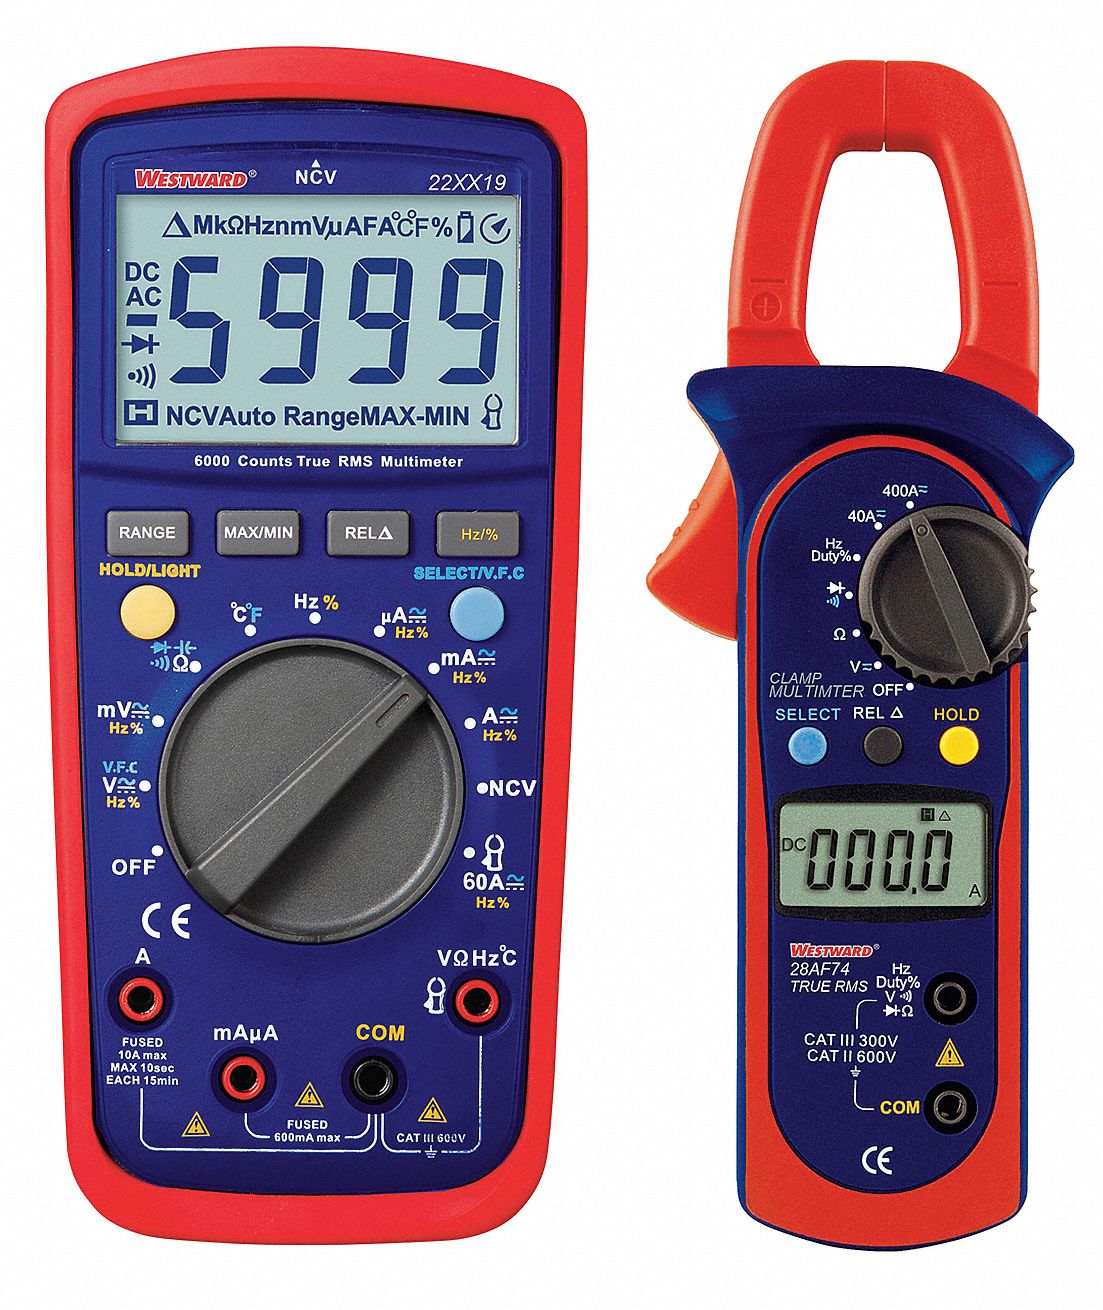 22XX29 - Digital Multimeter and Clamp On Ammeter